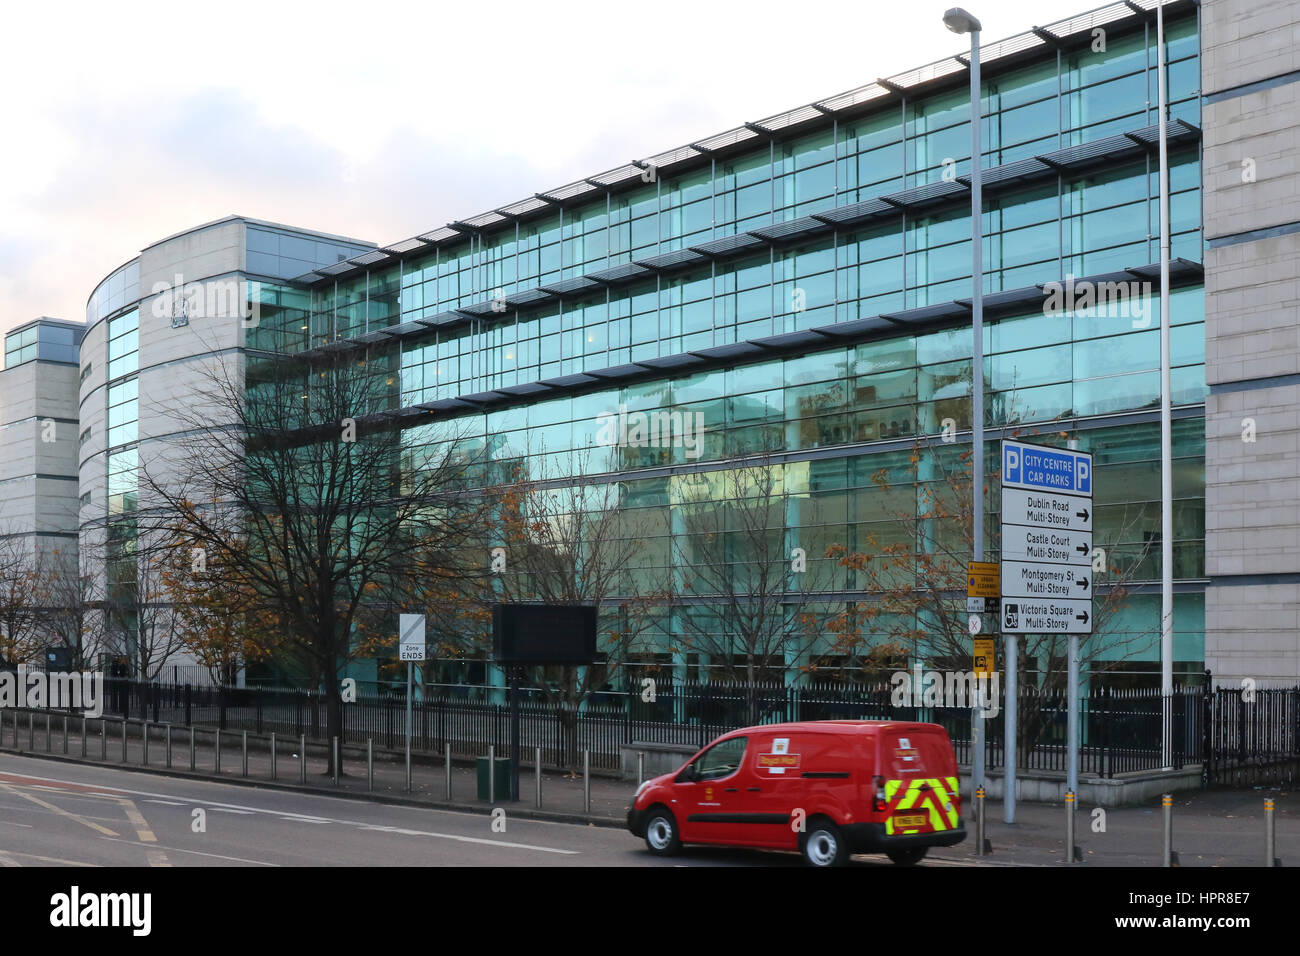 The Laganside Courts complex in Belfast, Northern Ireland. The courts house Crown Courts, County Courts, Family Care Courts and Magistrates Courts. Stock Photo